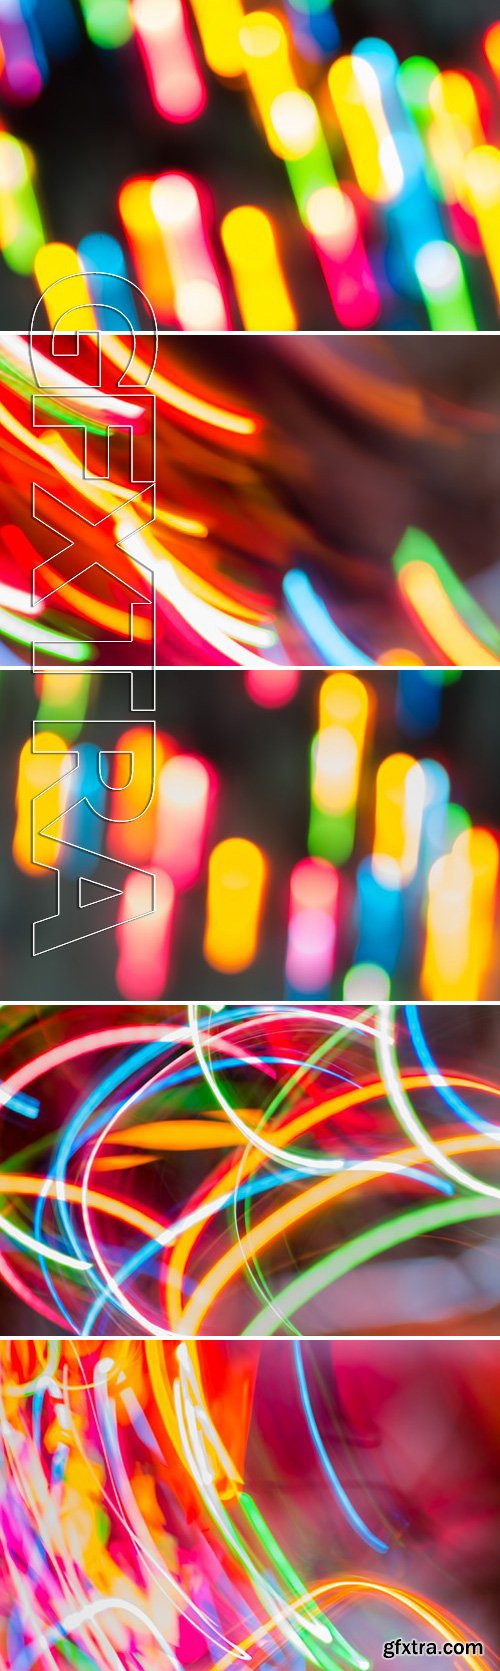 Stock Photos - Abstract Colorful Lights Motion Blur